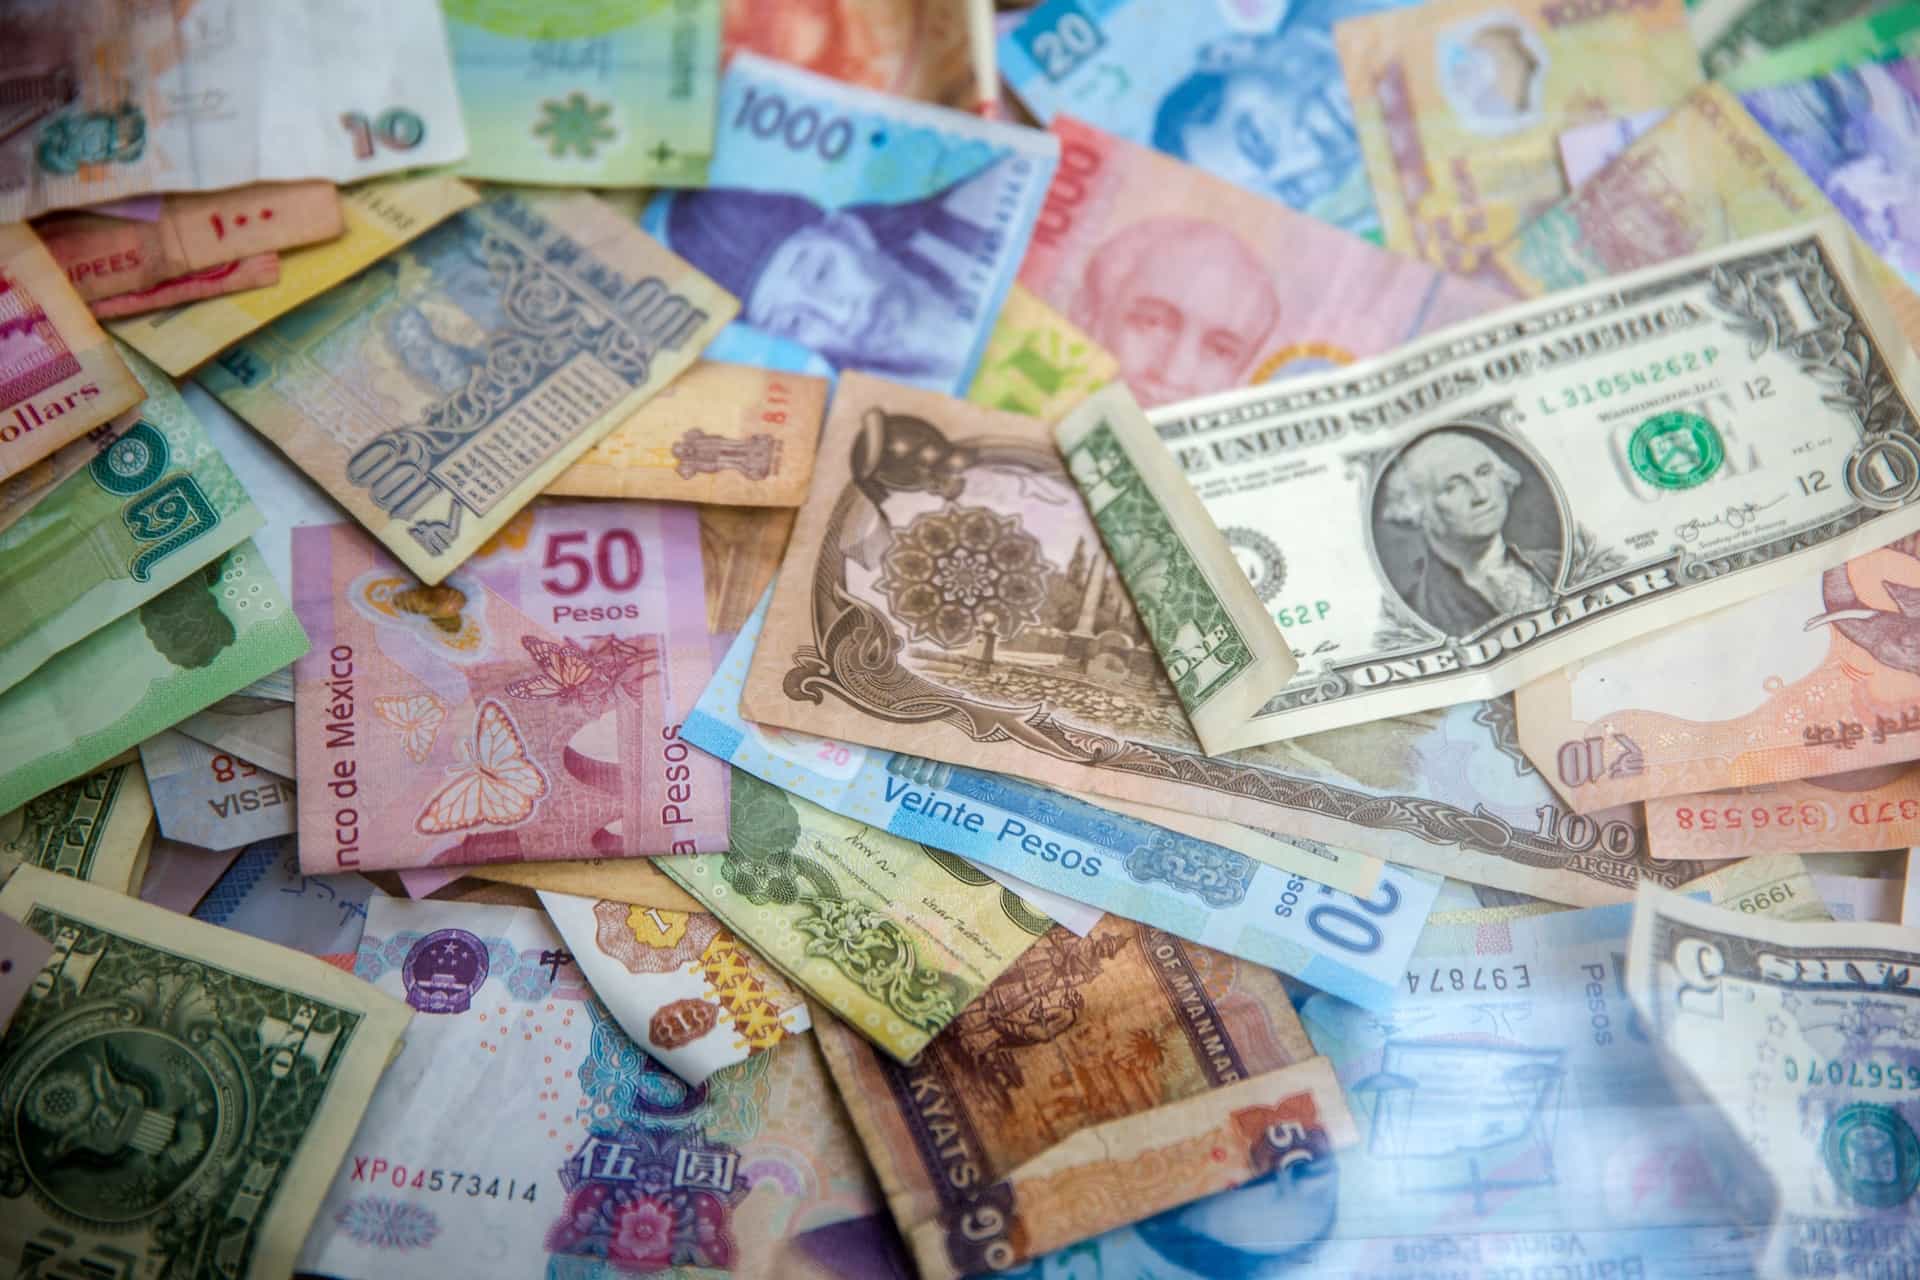 Various colorful currencies displayed on a flat surface with a $1 USD bill on top.